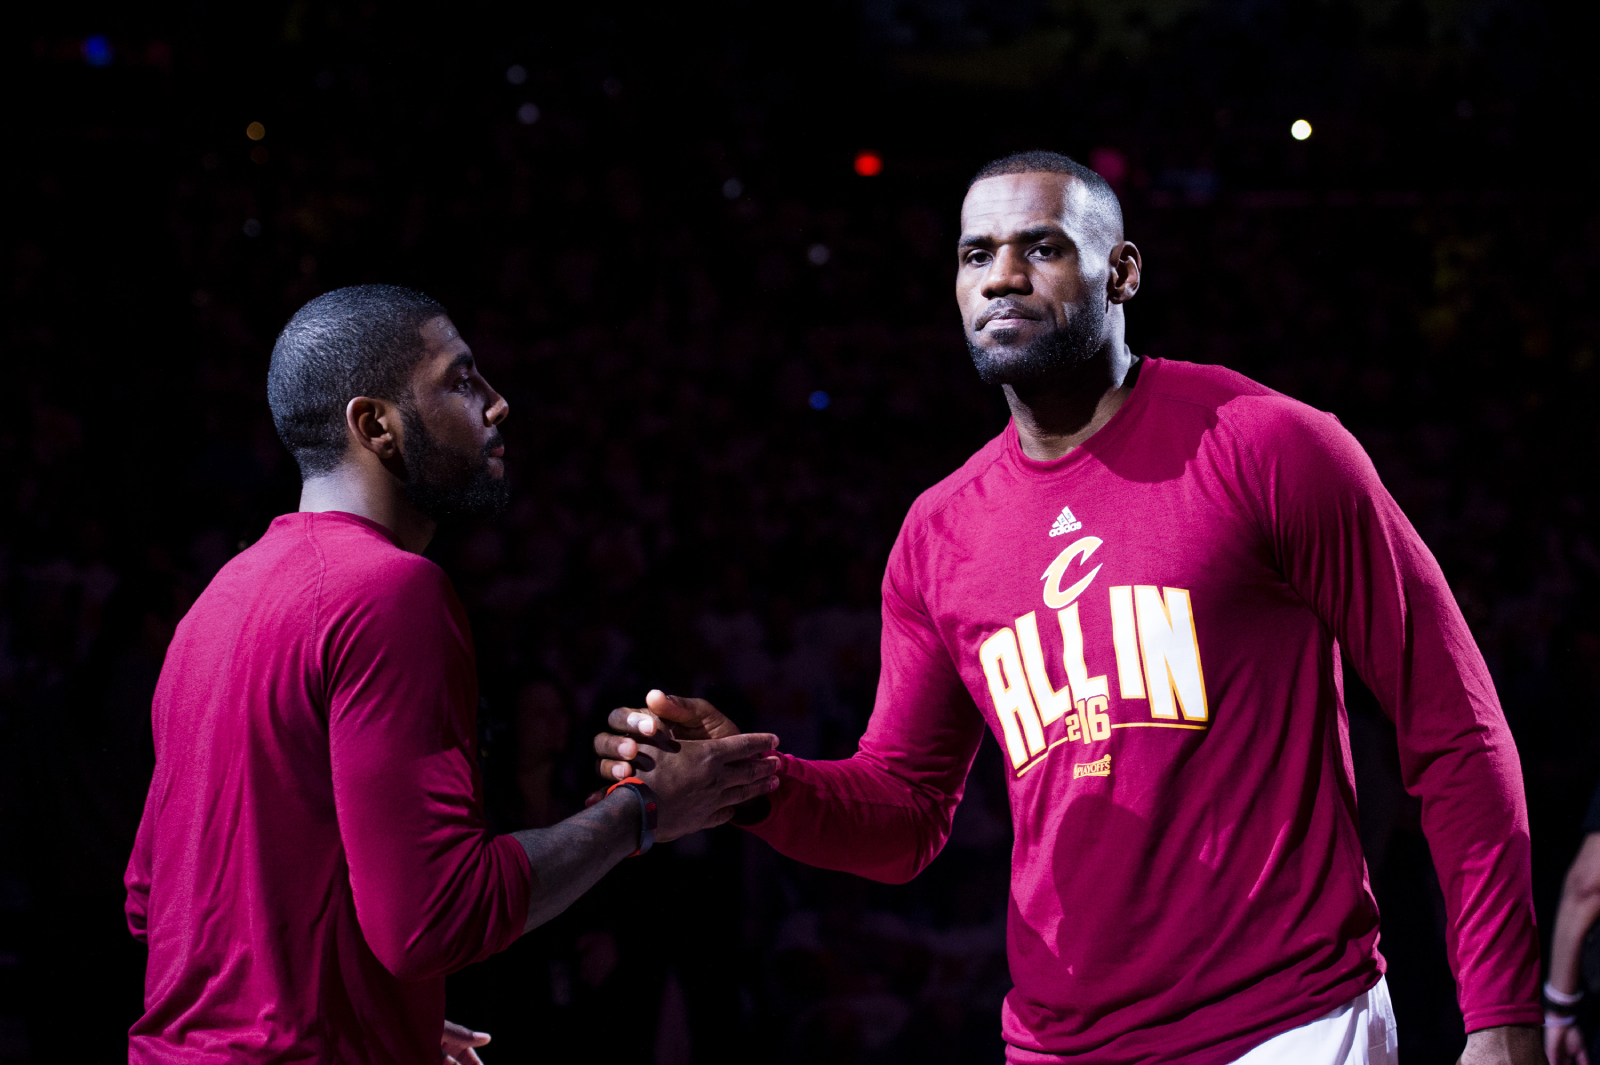 There has been a ton of speculation about the relationship between Kyrie Irving and LeBron James. Well, we maybe have some answers now.